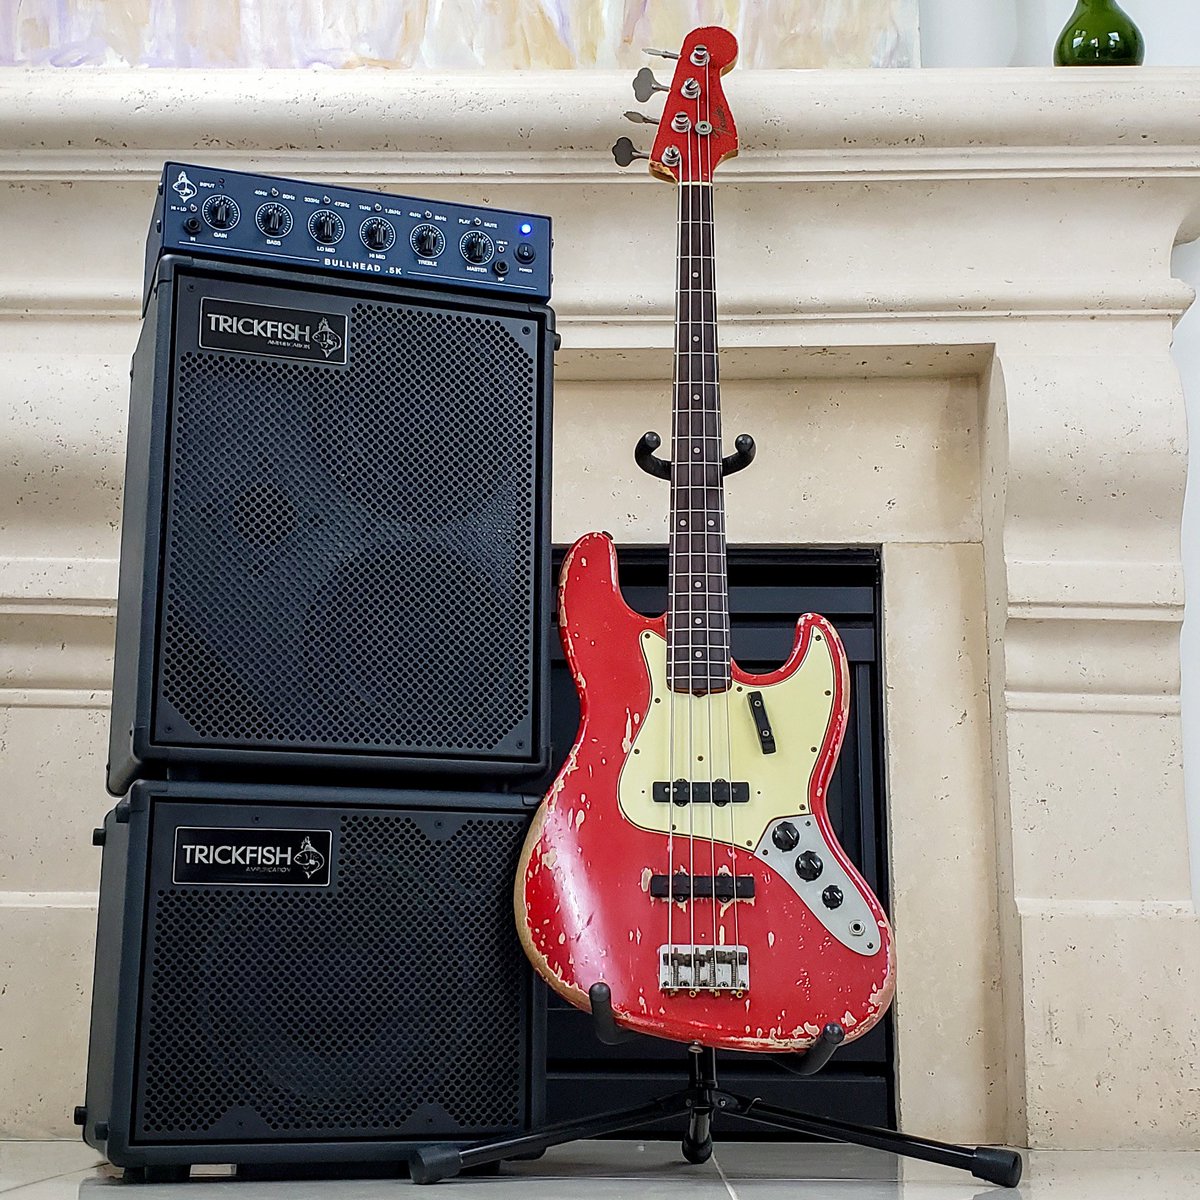 How is this for a power-packed stack - the Trickfish Bullhead .5K going into the TF208V and TF110 cabinets. Oh and the rig is joined by a 1964 Dakota Red Jazz Bass!
#trickfish #trickfishamps #bass #basscabinet #bassgear #tf208v #tf110 #bullhead.5k #bullhead #vintagefender